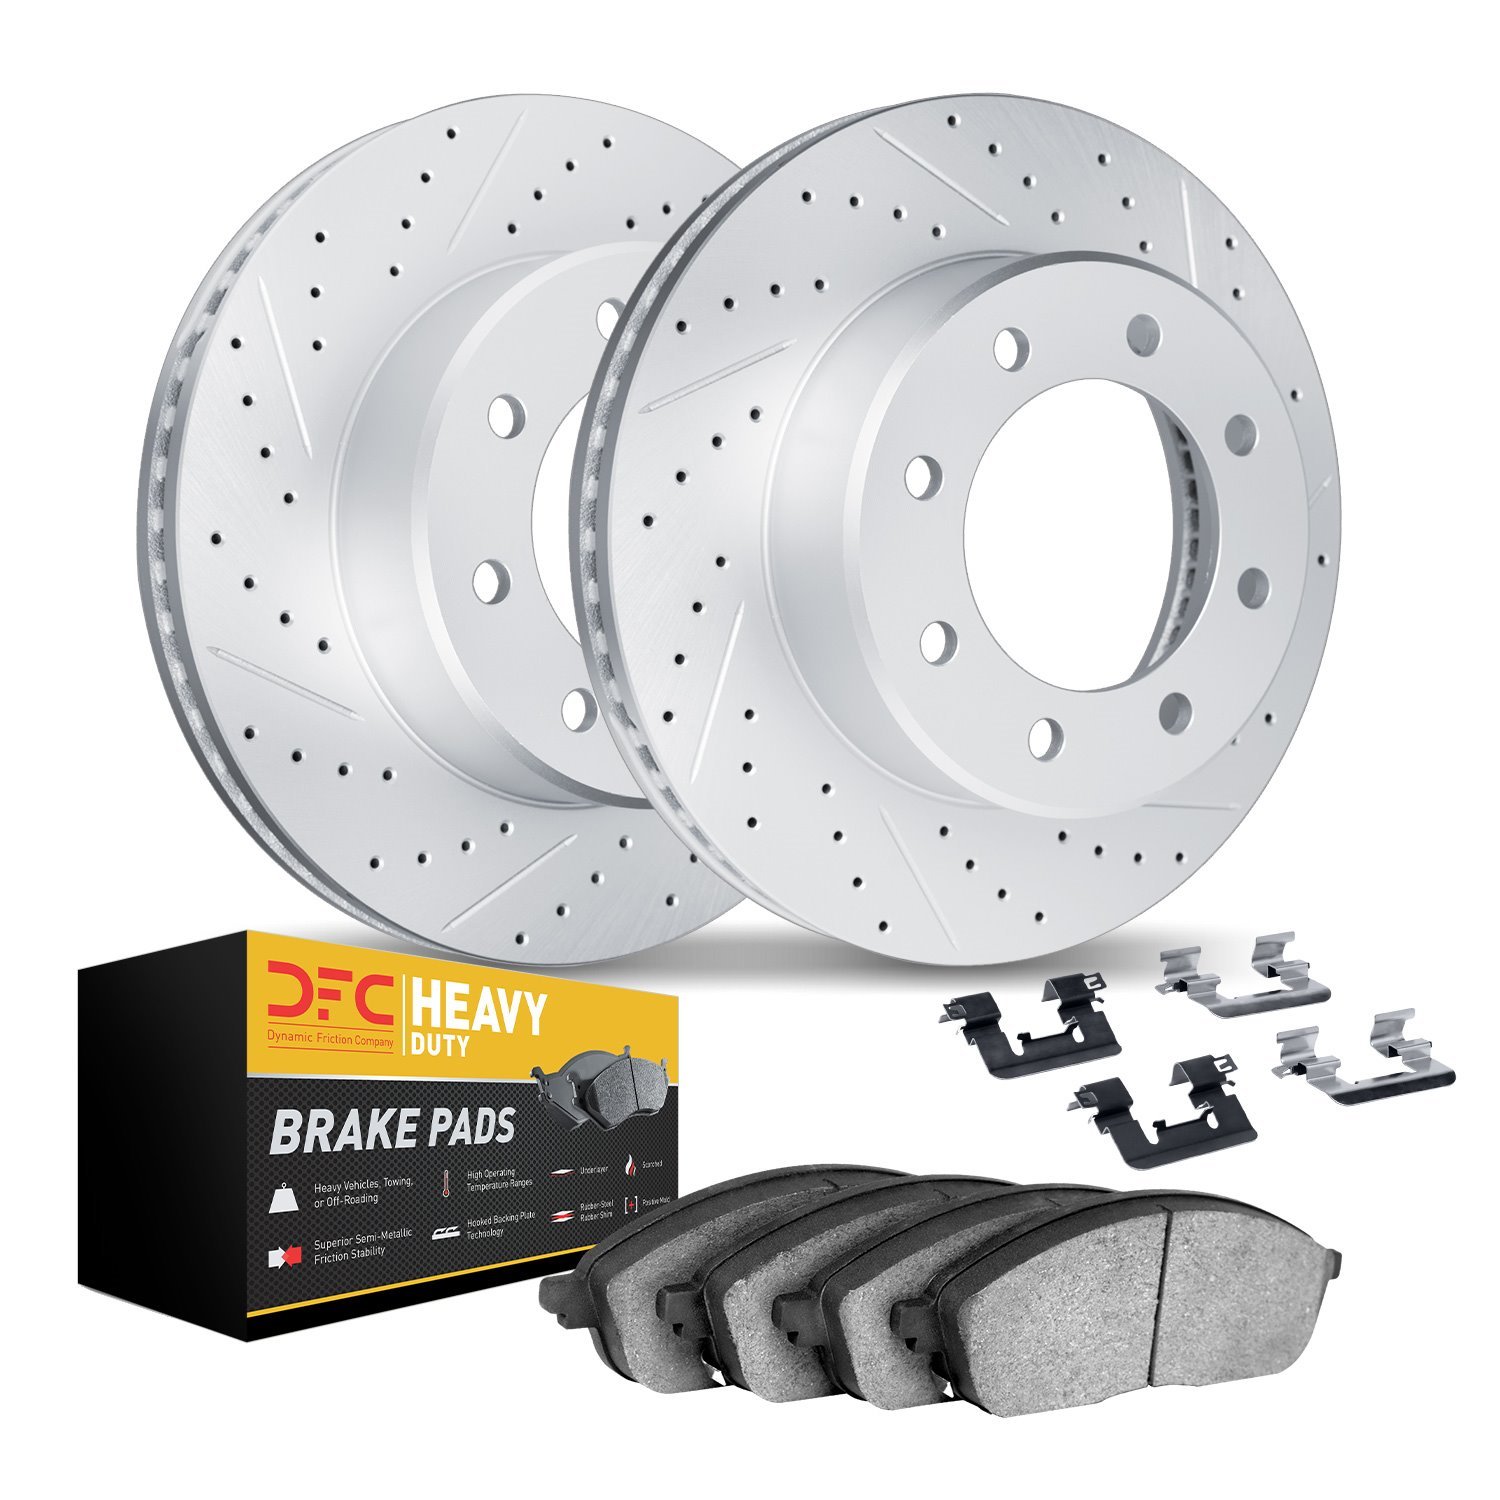 2212-99104 Geoperformance Drilled/Slotted Rotors w/Heavy-Duty Pads Kit & Hardware, 1999-2004 Ford/Lincoln/Mercury/Mazda, Positio